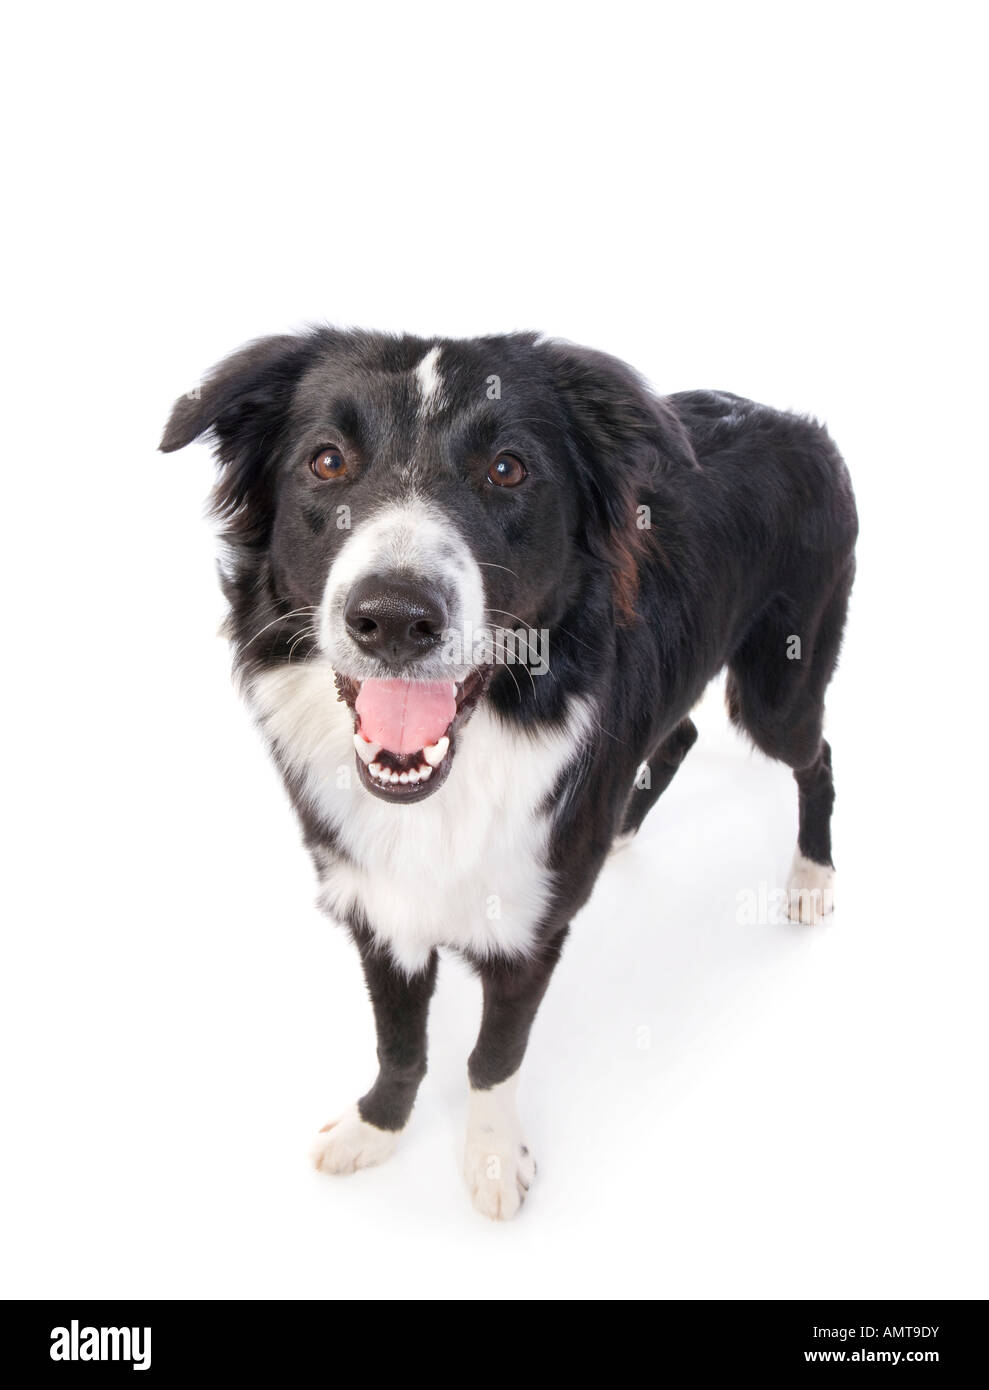 Adult Border Collie dog standing with mouth open isolated on white Stock Photo